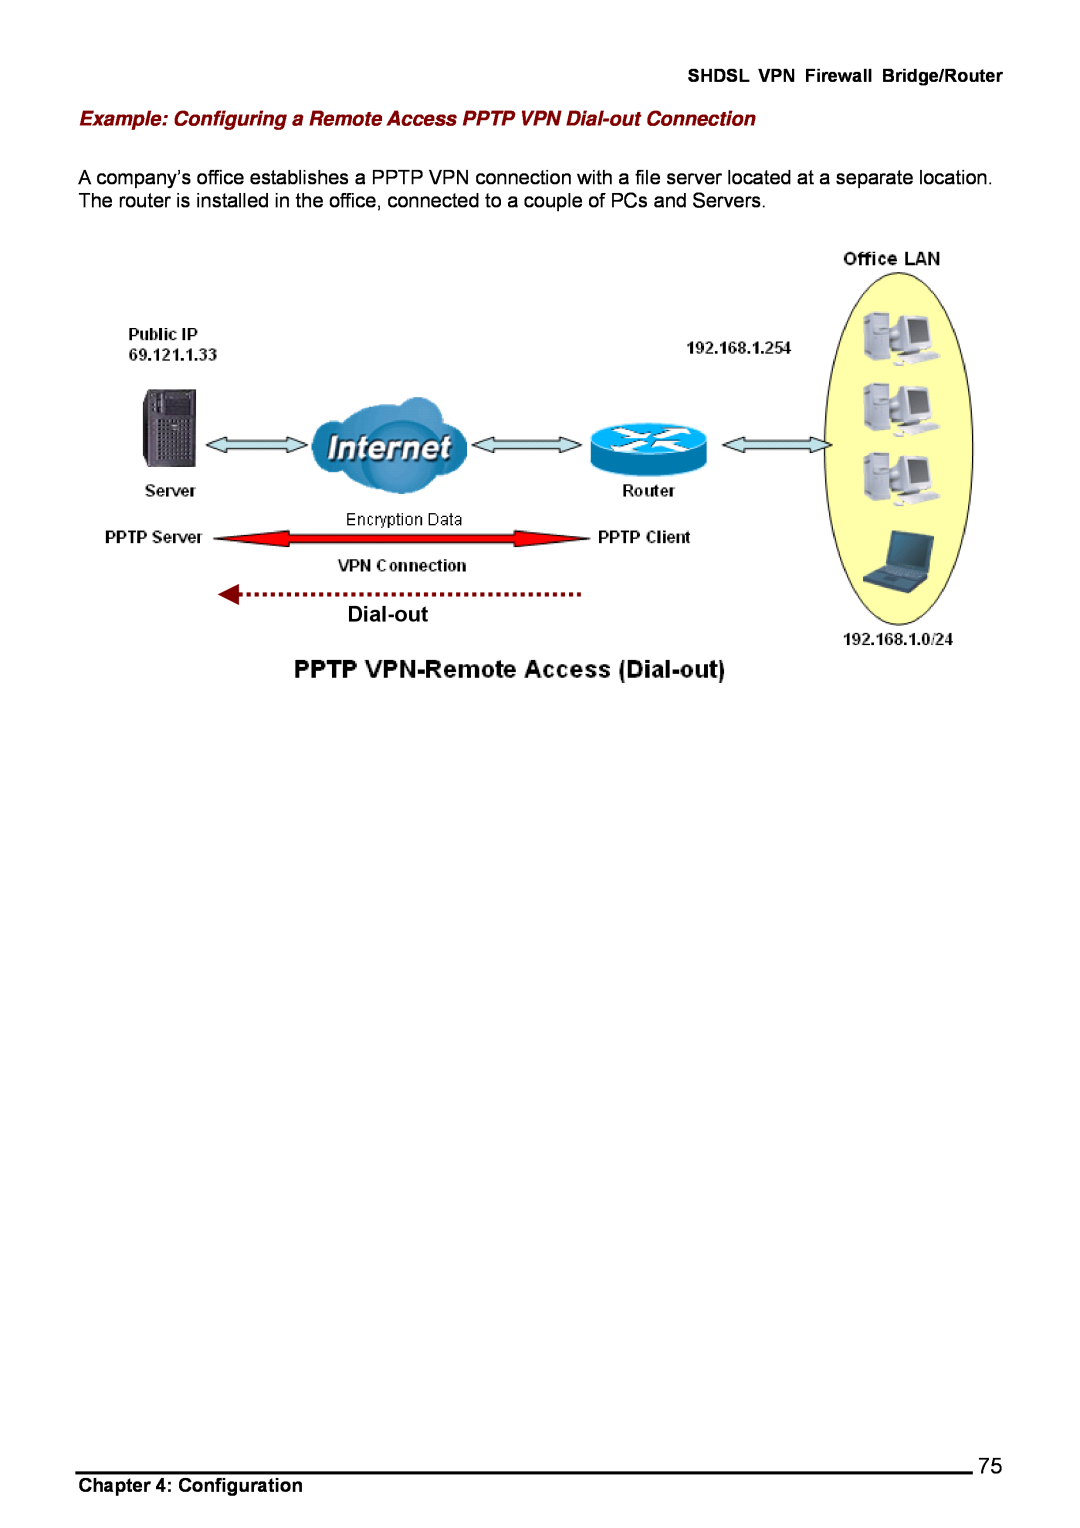 Billion Electric Company 8501 Example Configuring a Remote Access PPTP VPN Dial-out Connection, Configuration 